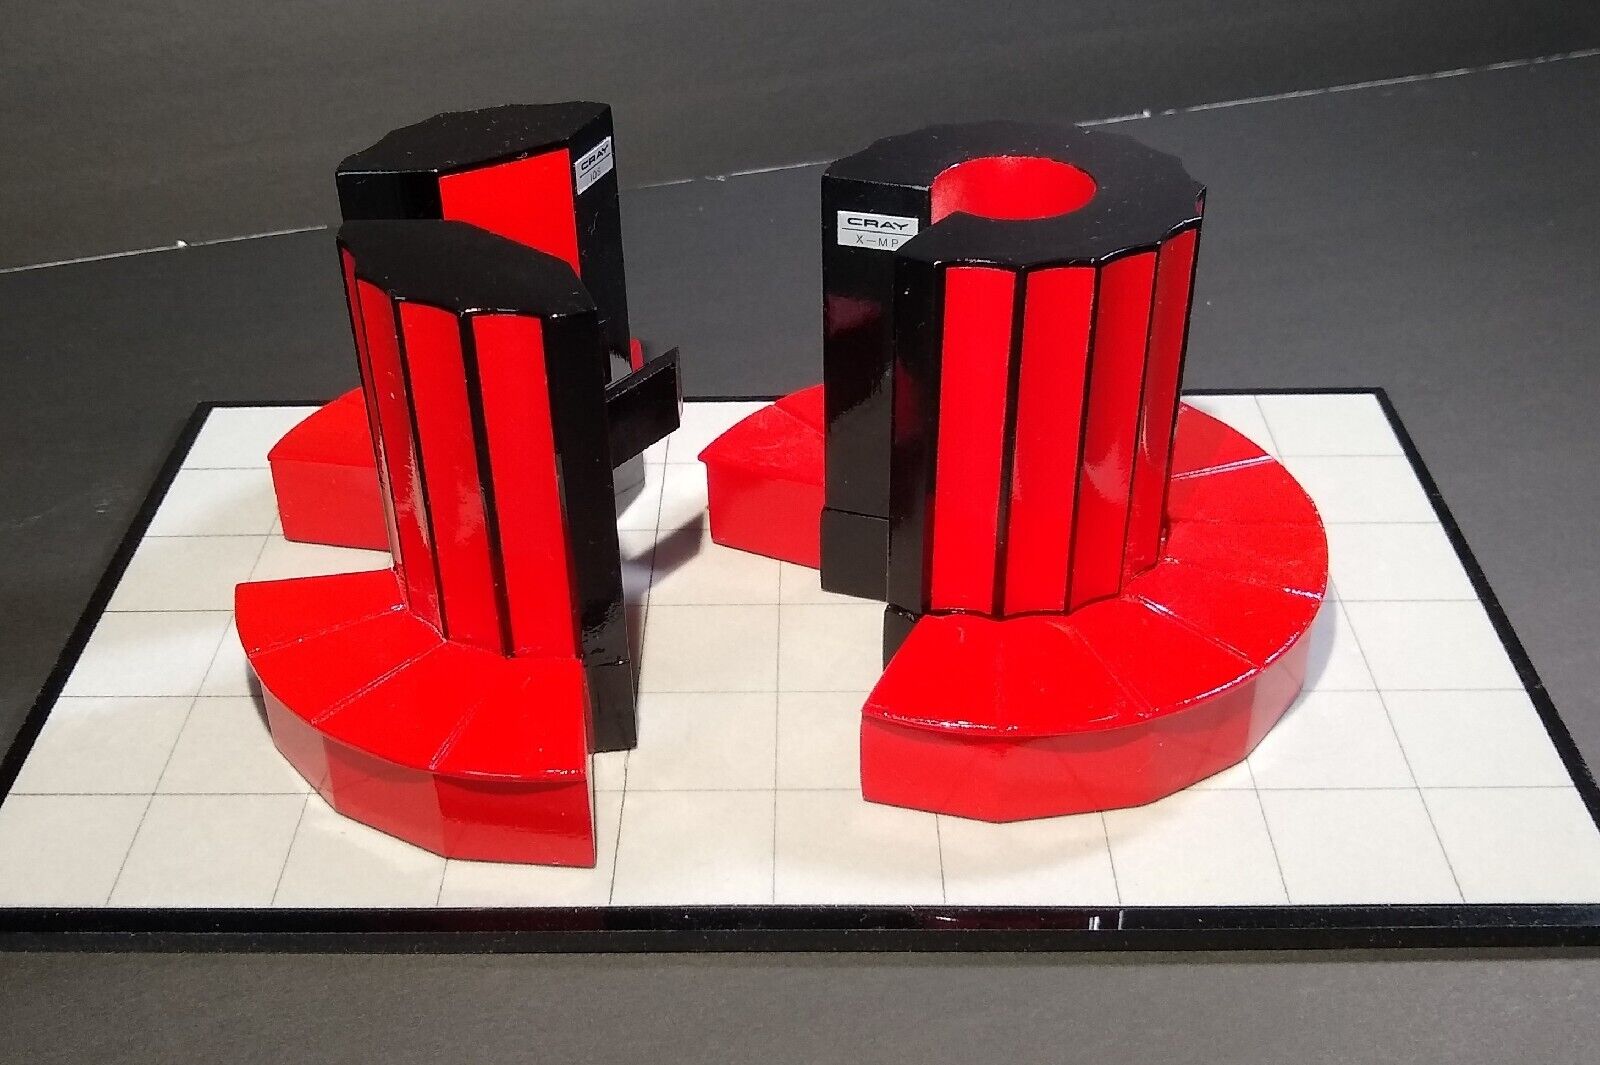 CRAY X-MP Supercomputer and Peripherals Scale Model with Base